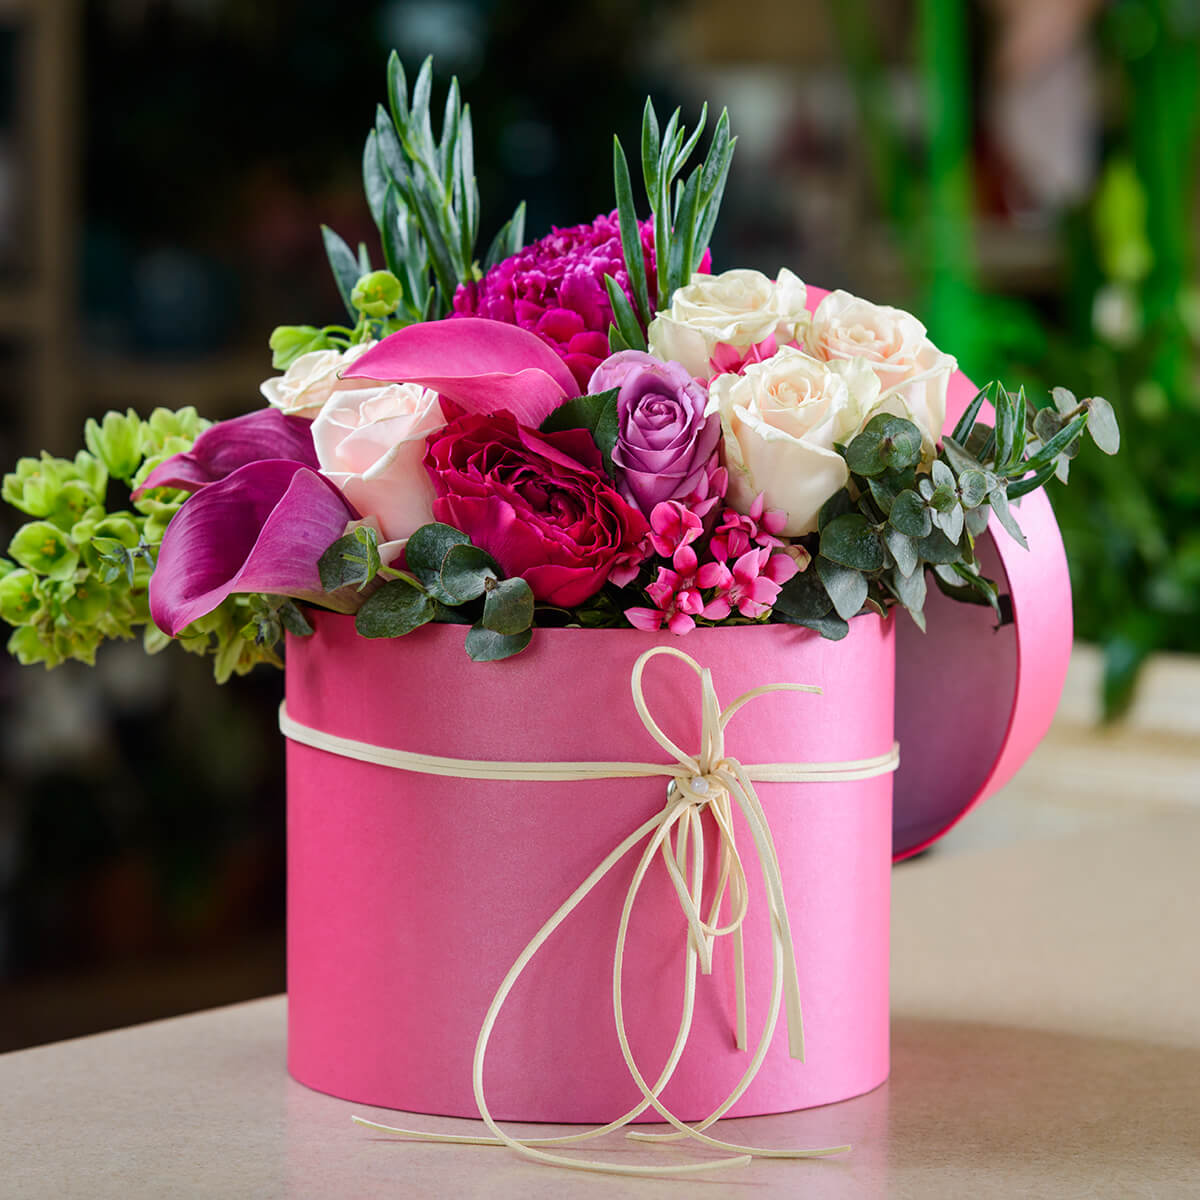 Online Flower Delivery, Free Shipping